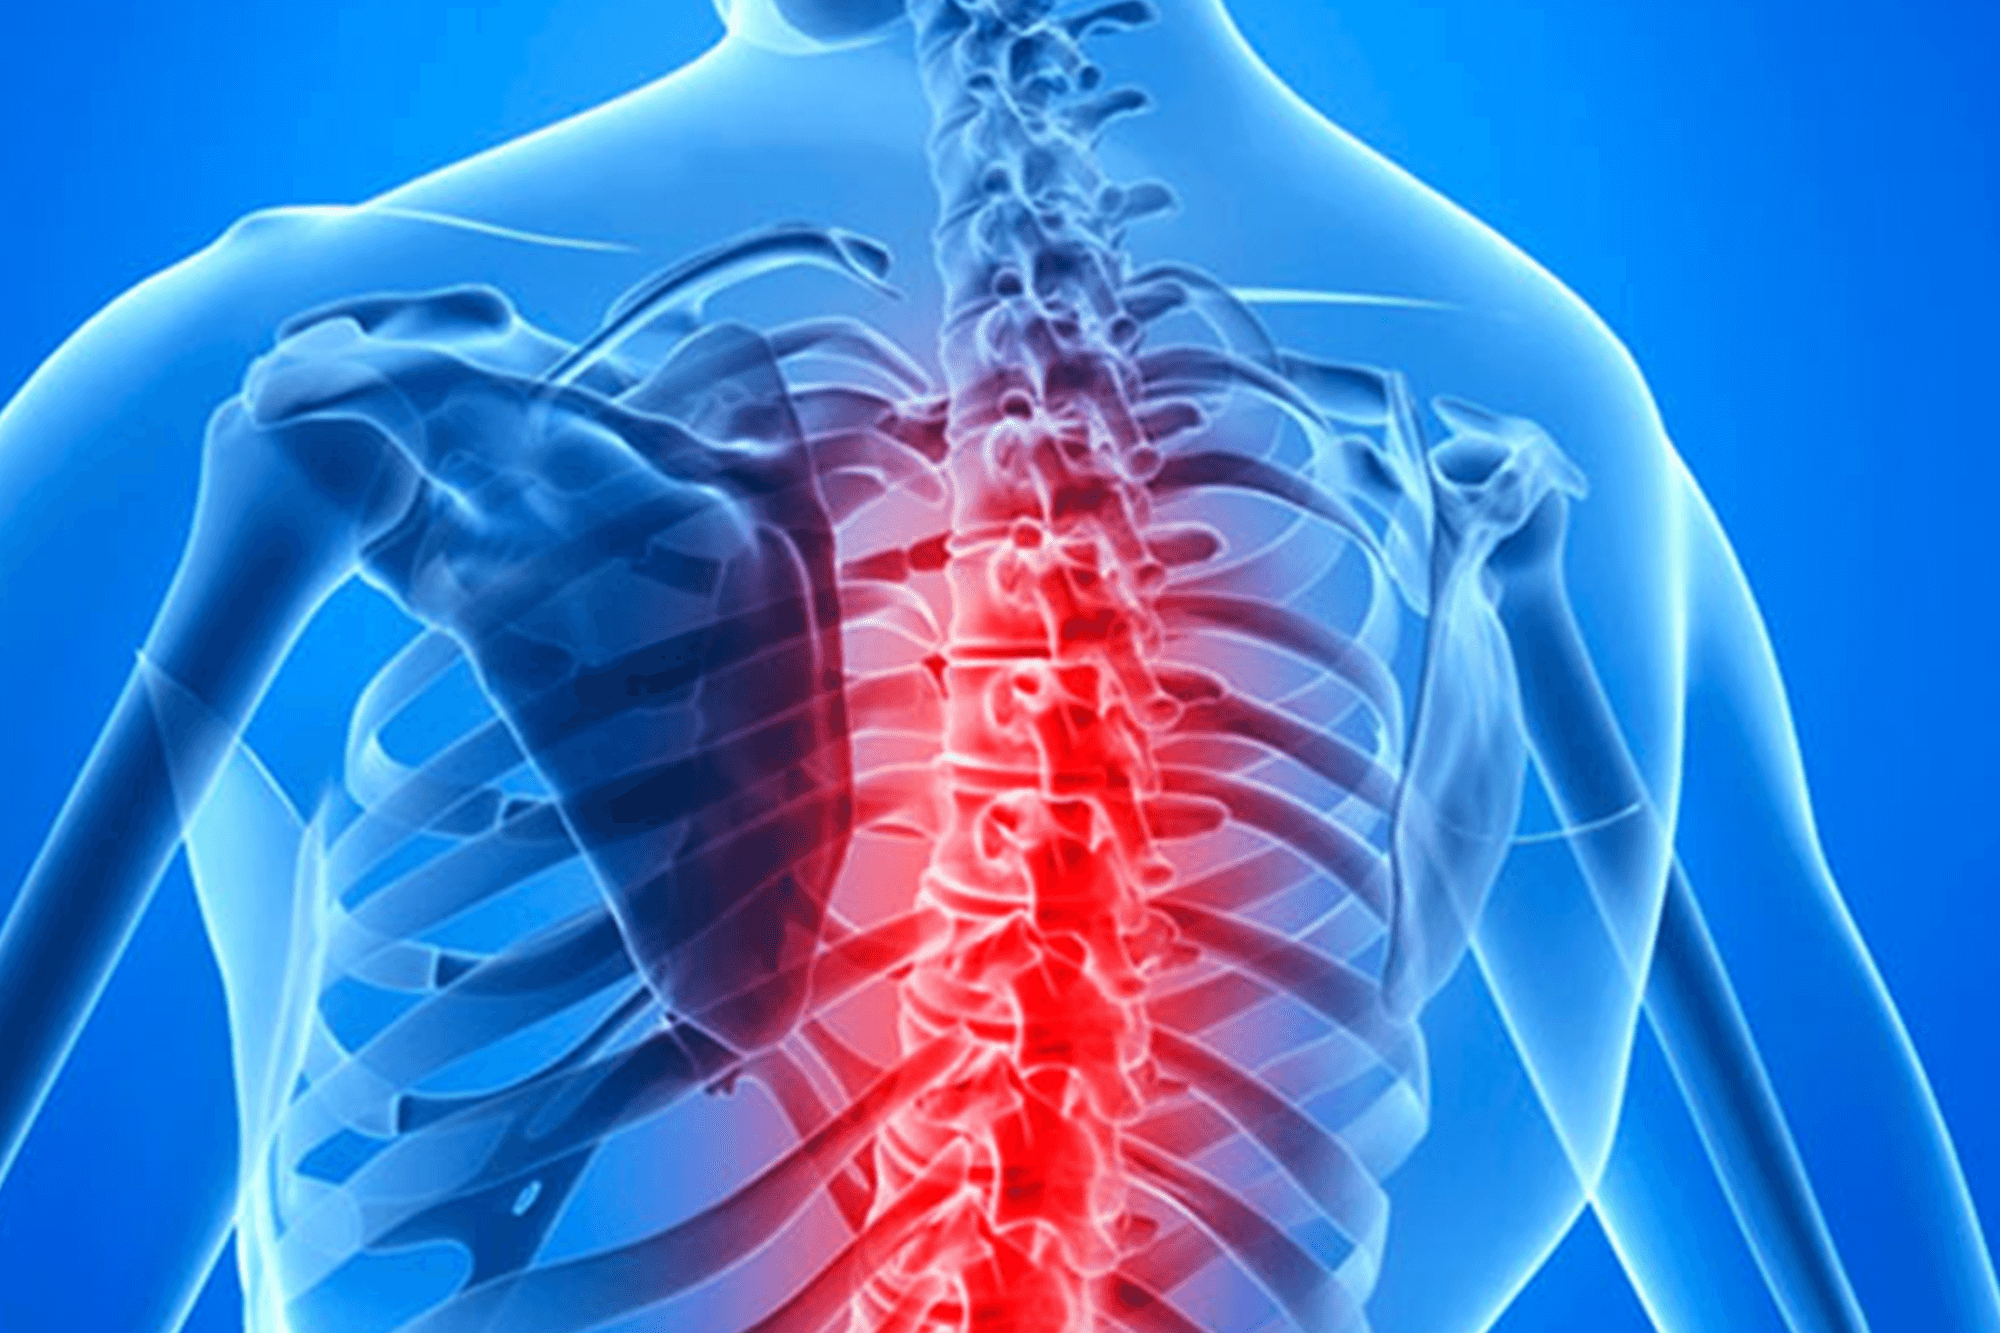 Treatment-Of-Spinal-Cord-Injuries-Integrative-And-Complementary-Medicine-Is-Widely-Used-1